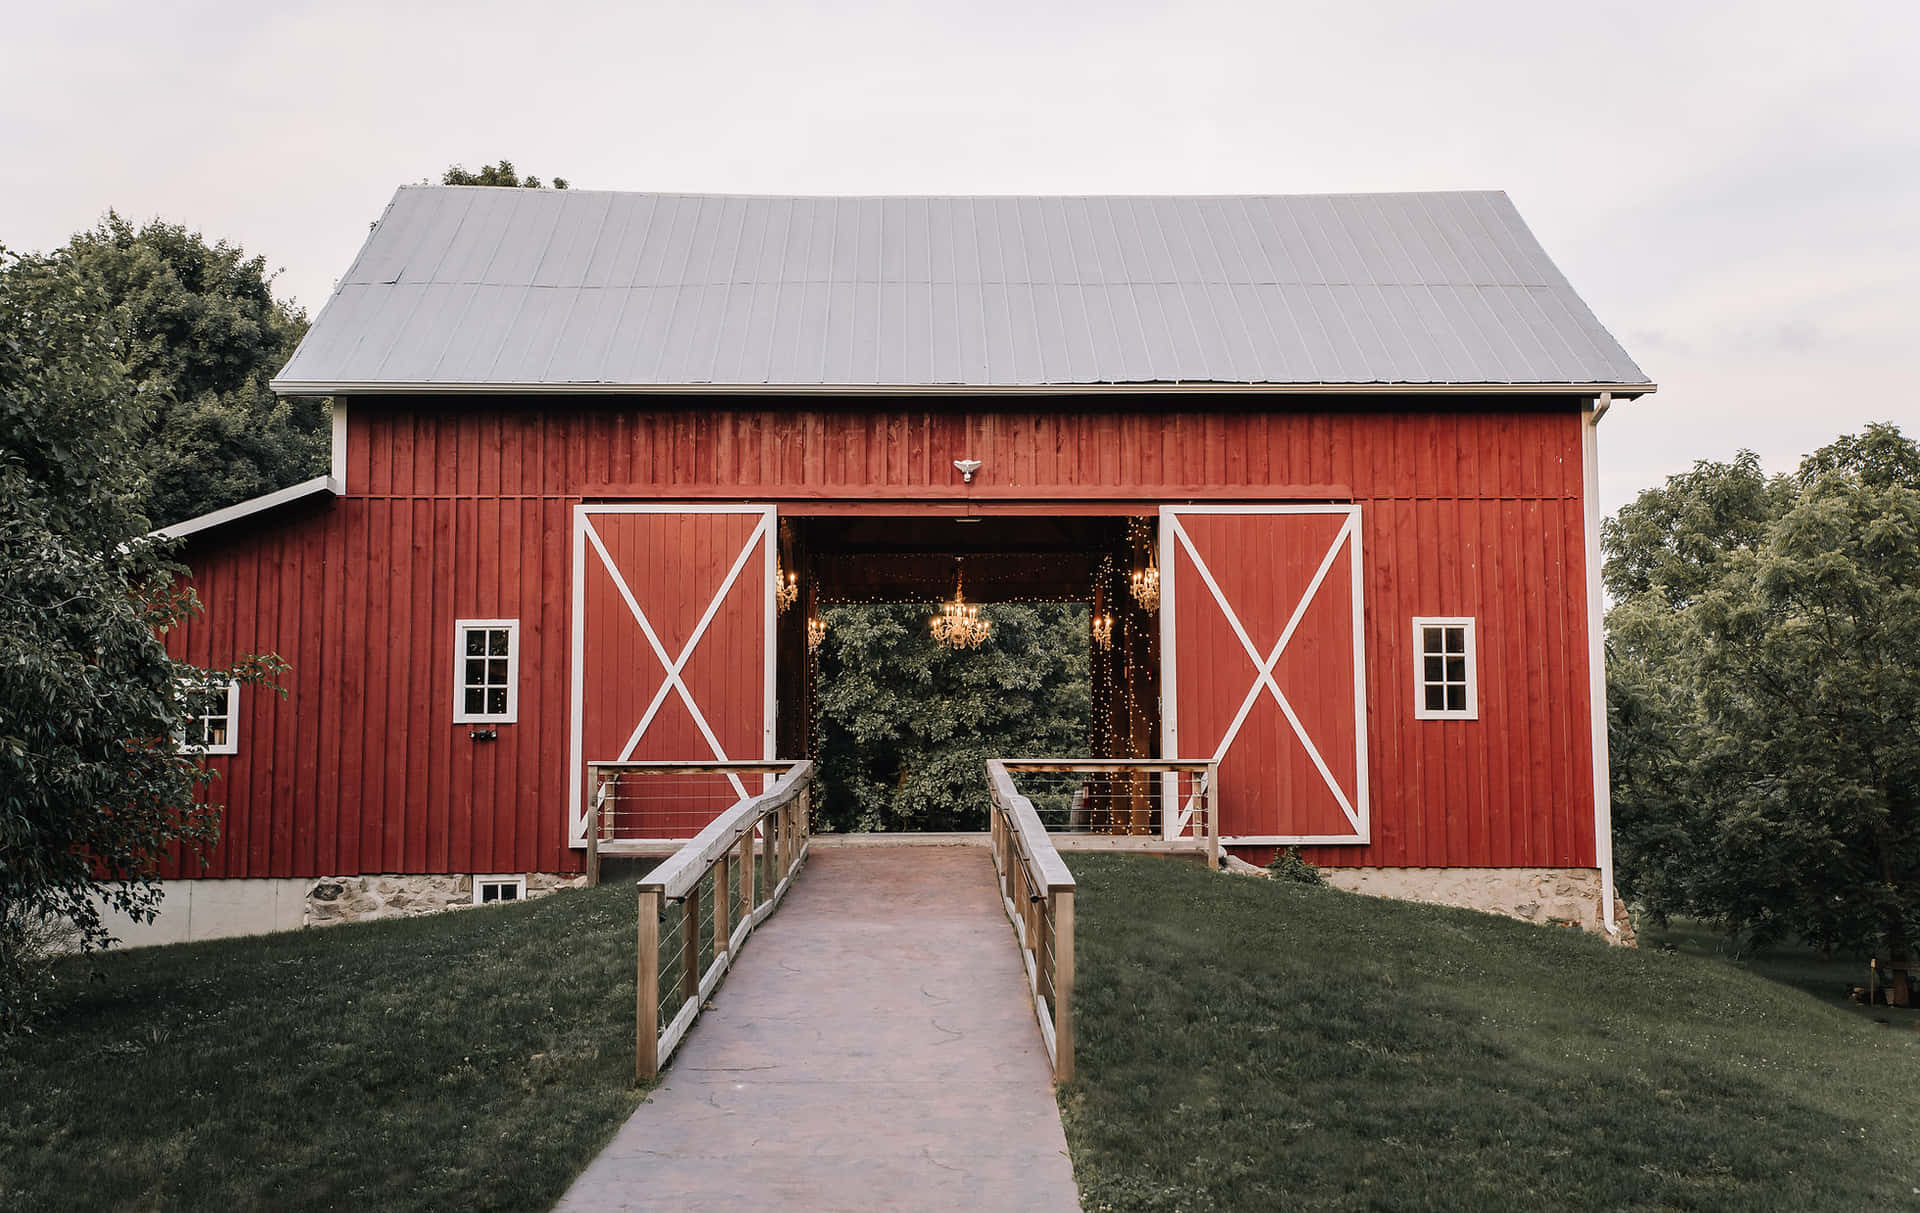 An old wooden barn surrounded by lush greenery